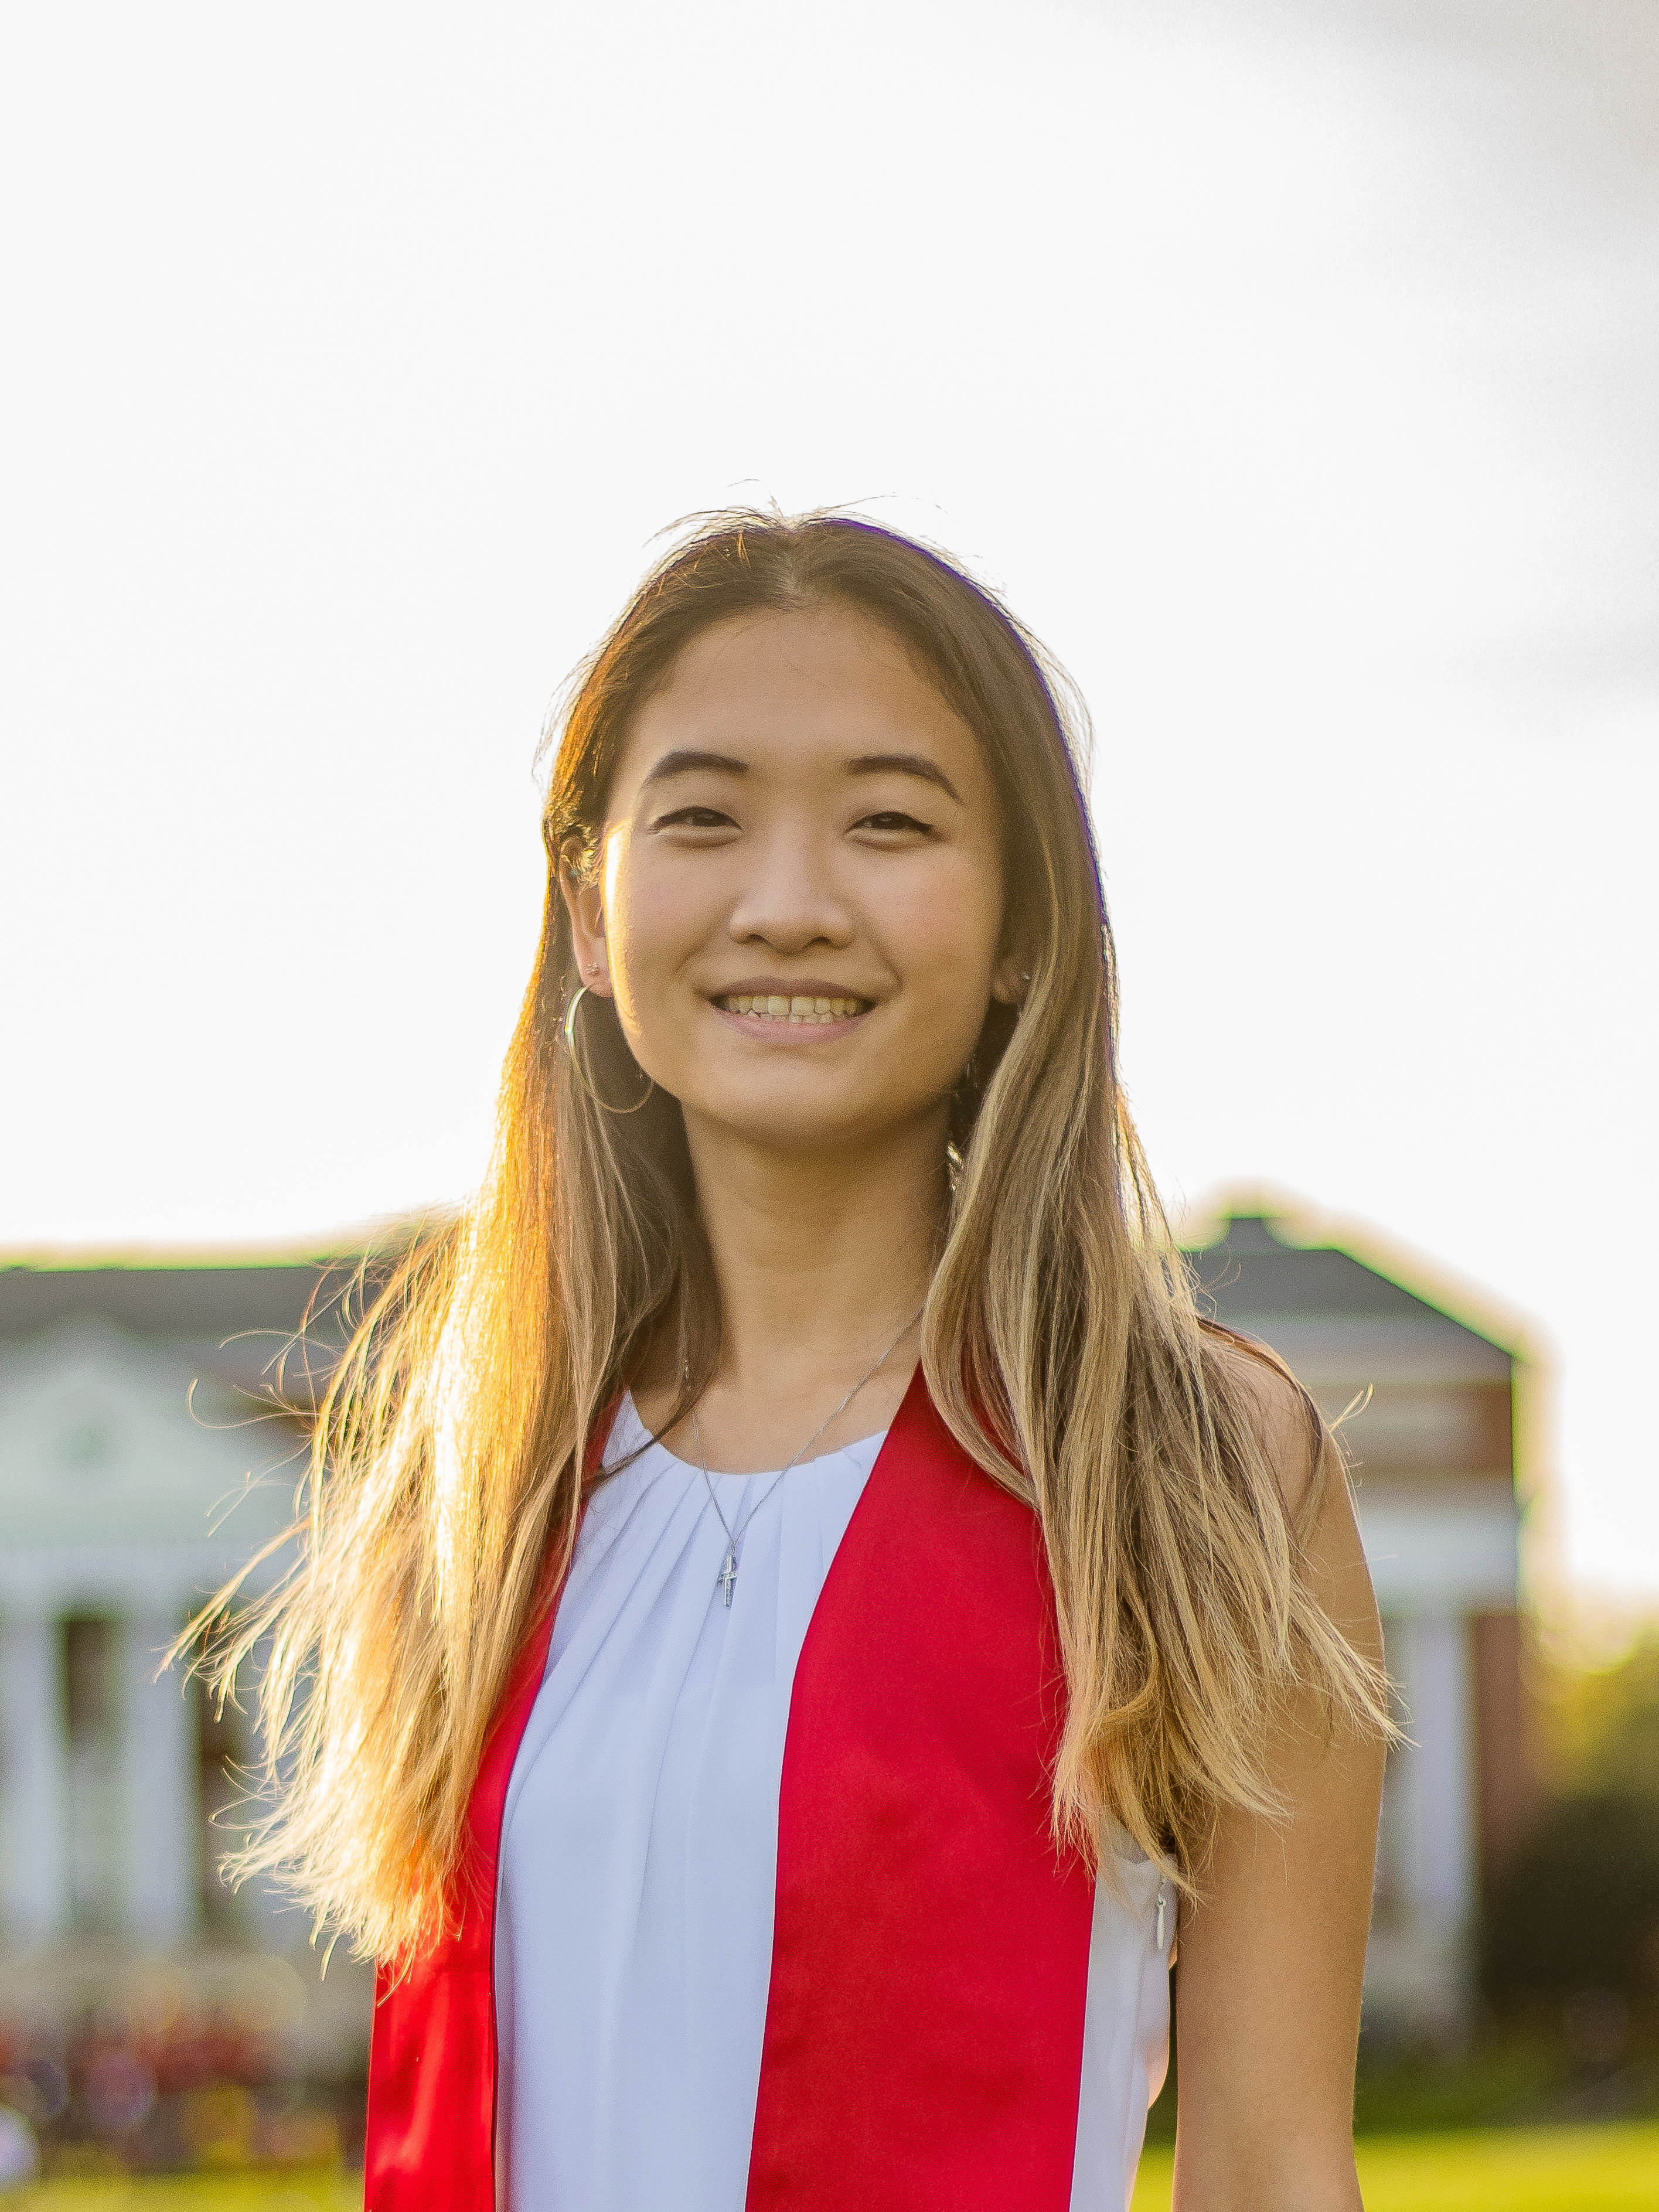 Autumn was born in Chia-yi, Taiwan, and moved to the US to attend University of Maryland College Park. She majored in computer science and linguistics. In her free time, she enjoys bouldering, taking photos, and making food that reminds her of home.